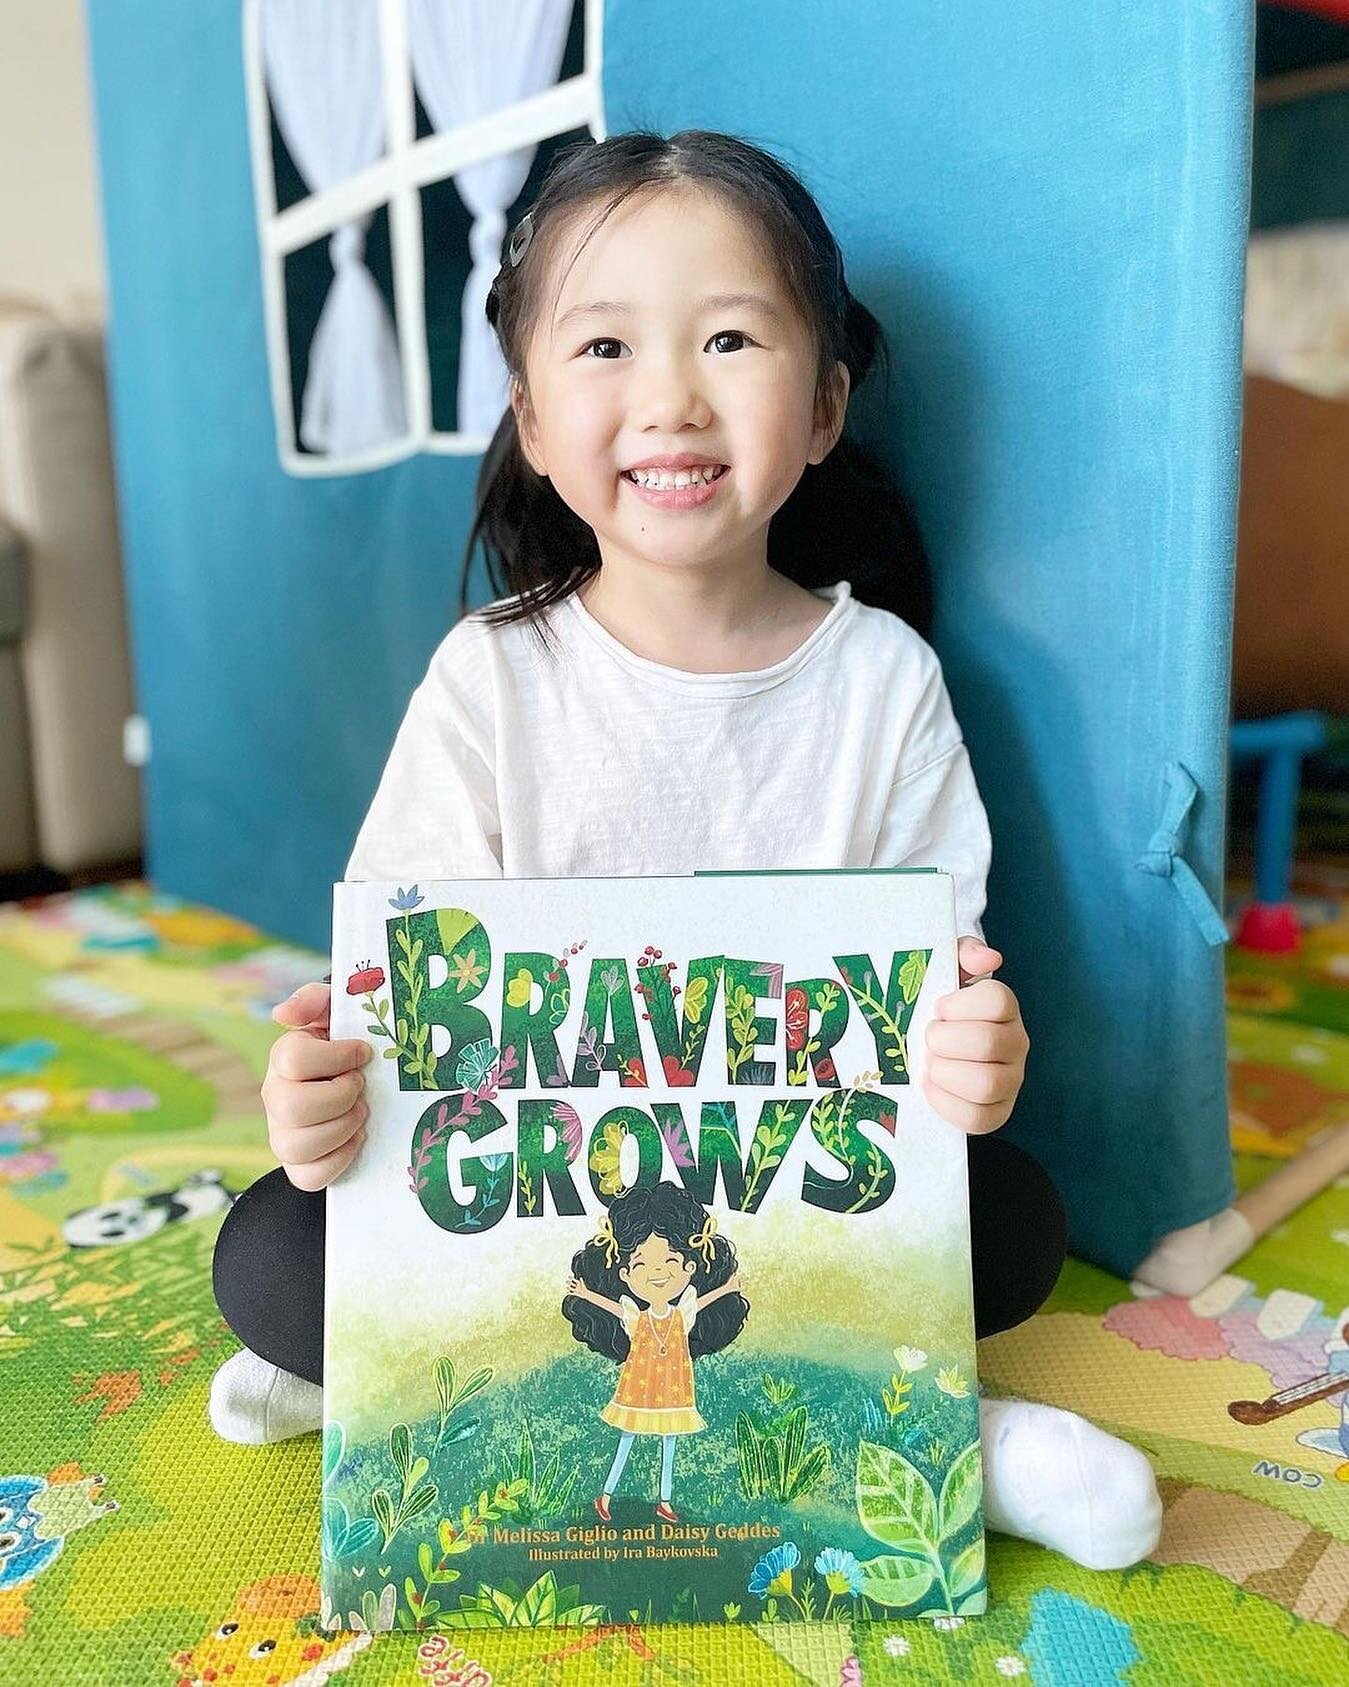 We love seeing our book bringing out big smiles and confident voices! 🌟👏🏼

Thanks so much @hongkongmomslife for sharing this with us 💕⁠
__________________________⁠
⁠
#Repost from @hongkongmoms⁠
⁠
𝘽𝙧𝙖𝙫𝙚𝙧𝙮 𝙂𝙧𝙤𝙬𝙨 came at the best time fo